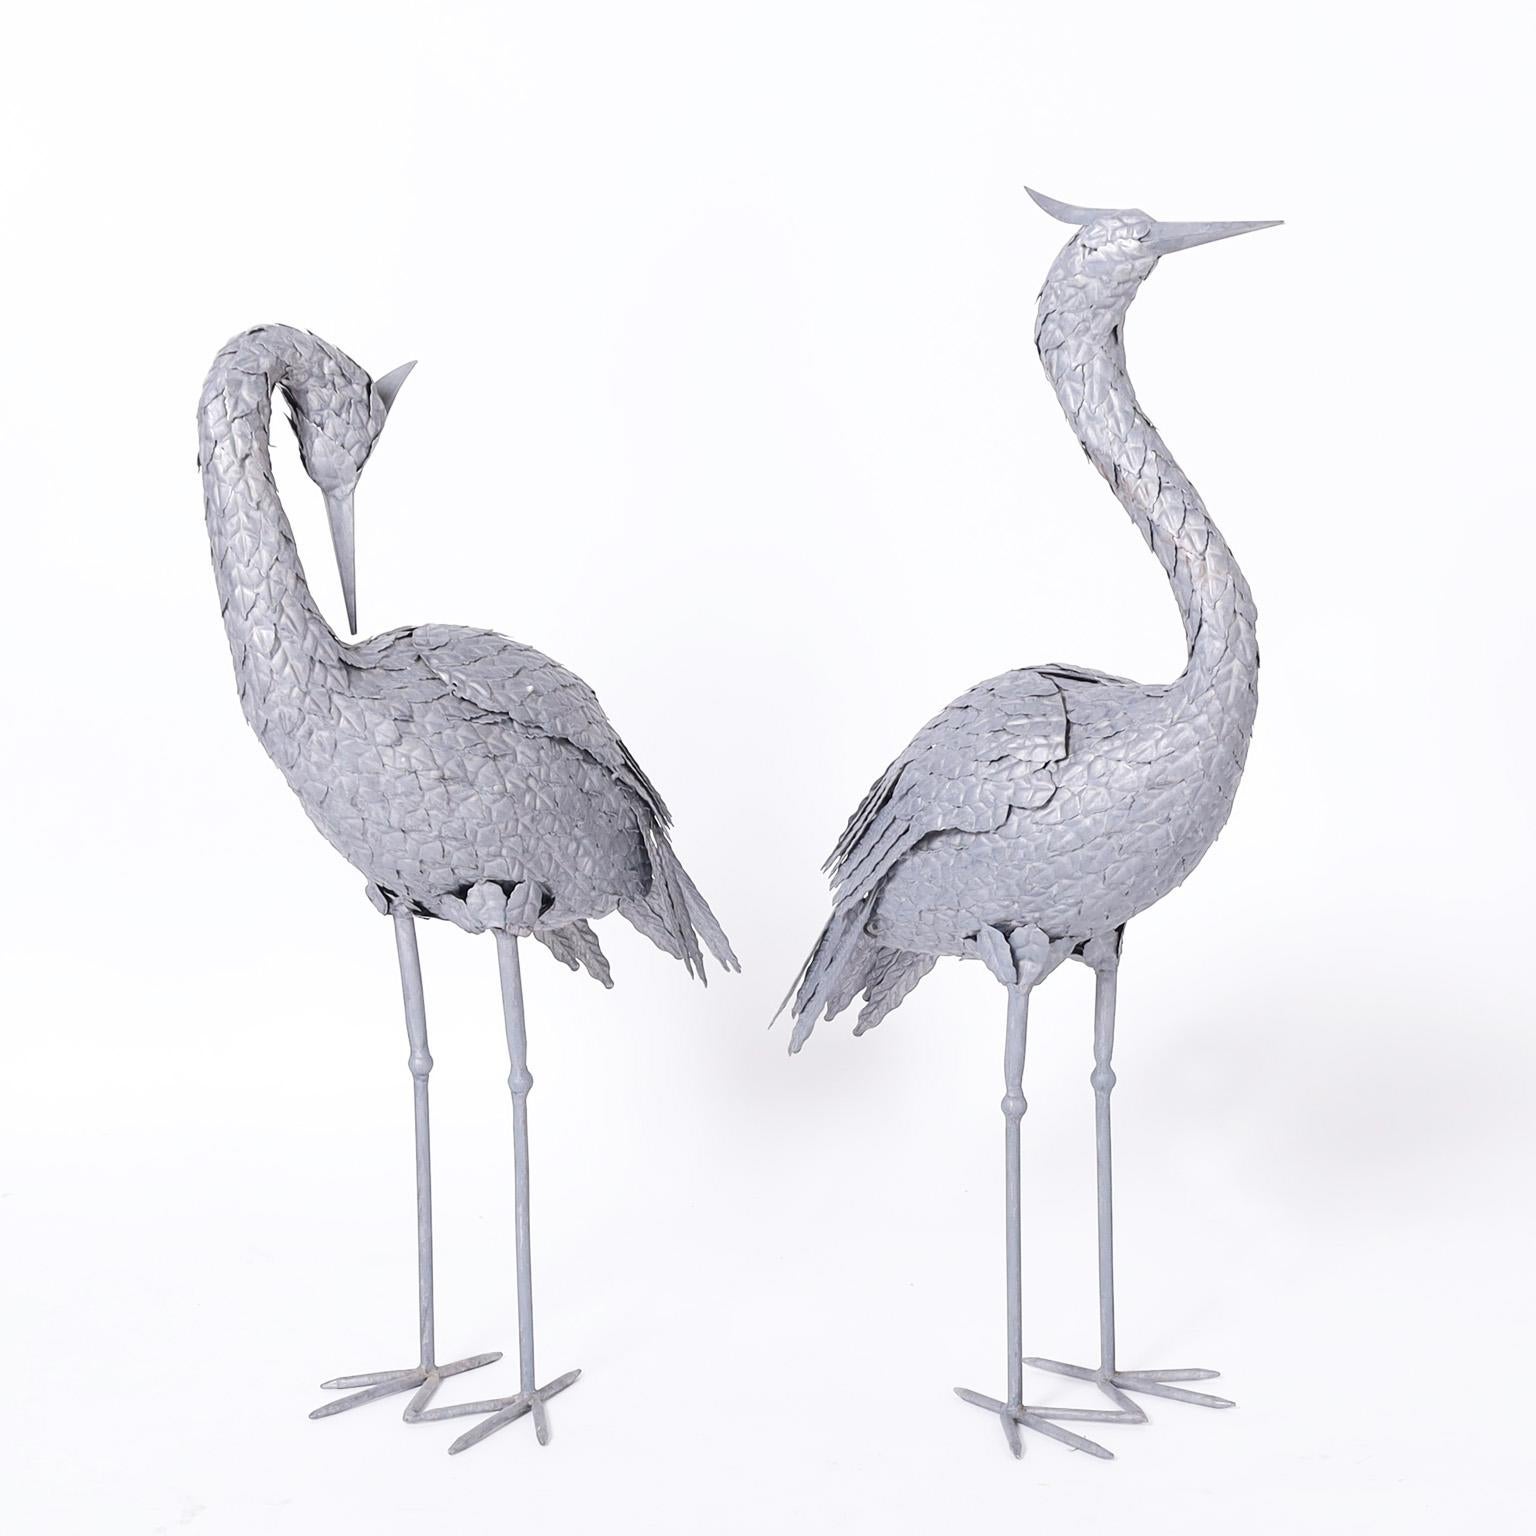 Standup pair of life size mid century cranes hand crafted in metal, each with its own familiar stance and chic raw metal finish.

Left H: 29 W: 17 D: 7
Right H: 32 W: 20 D: 7.